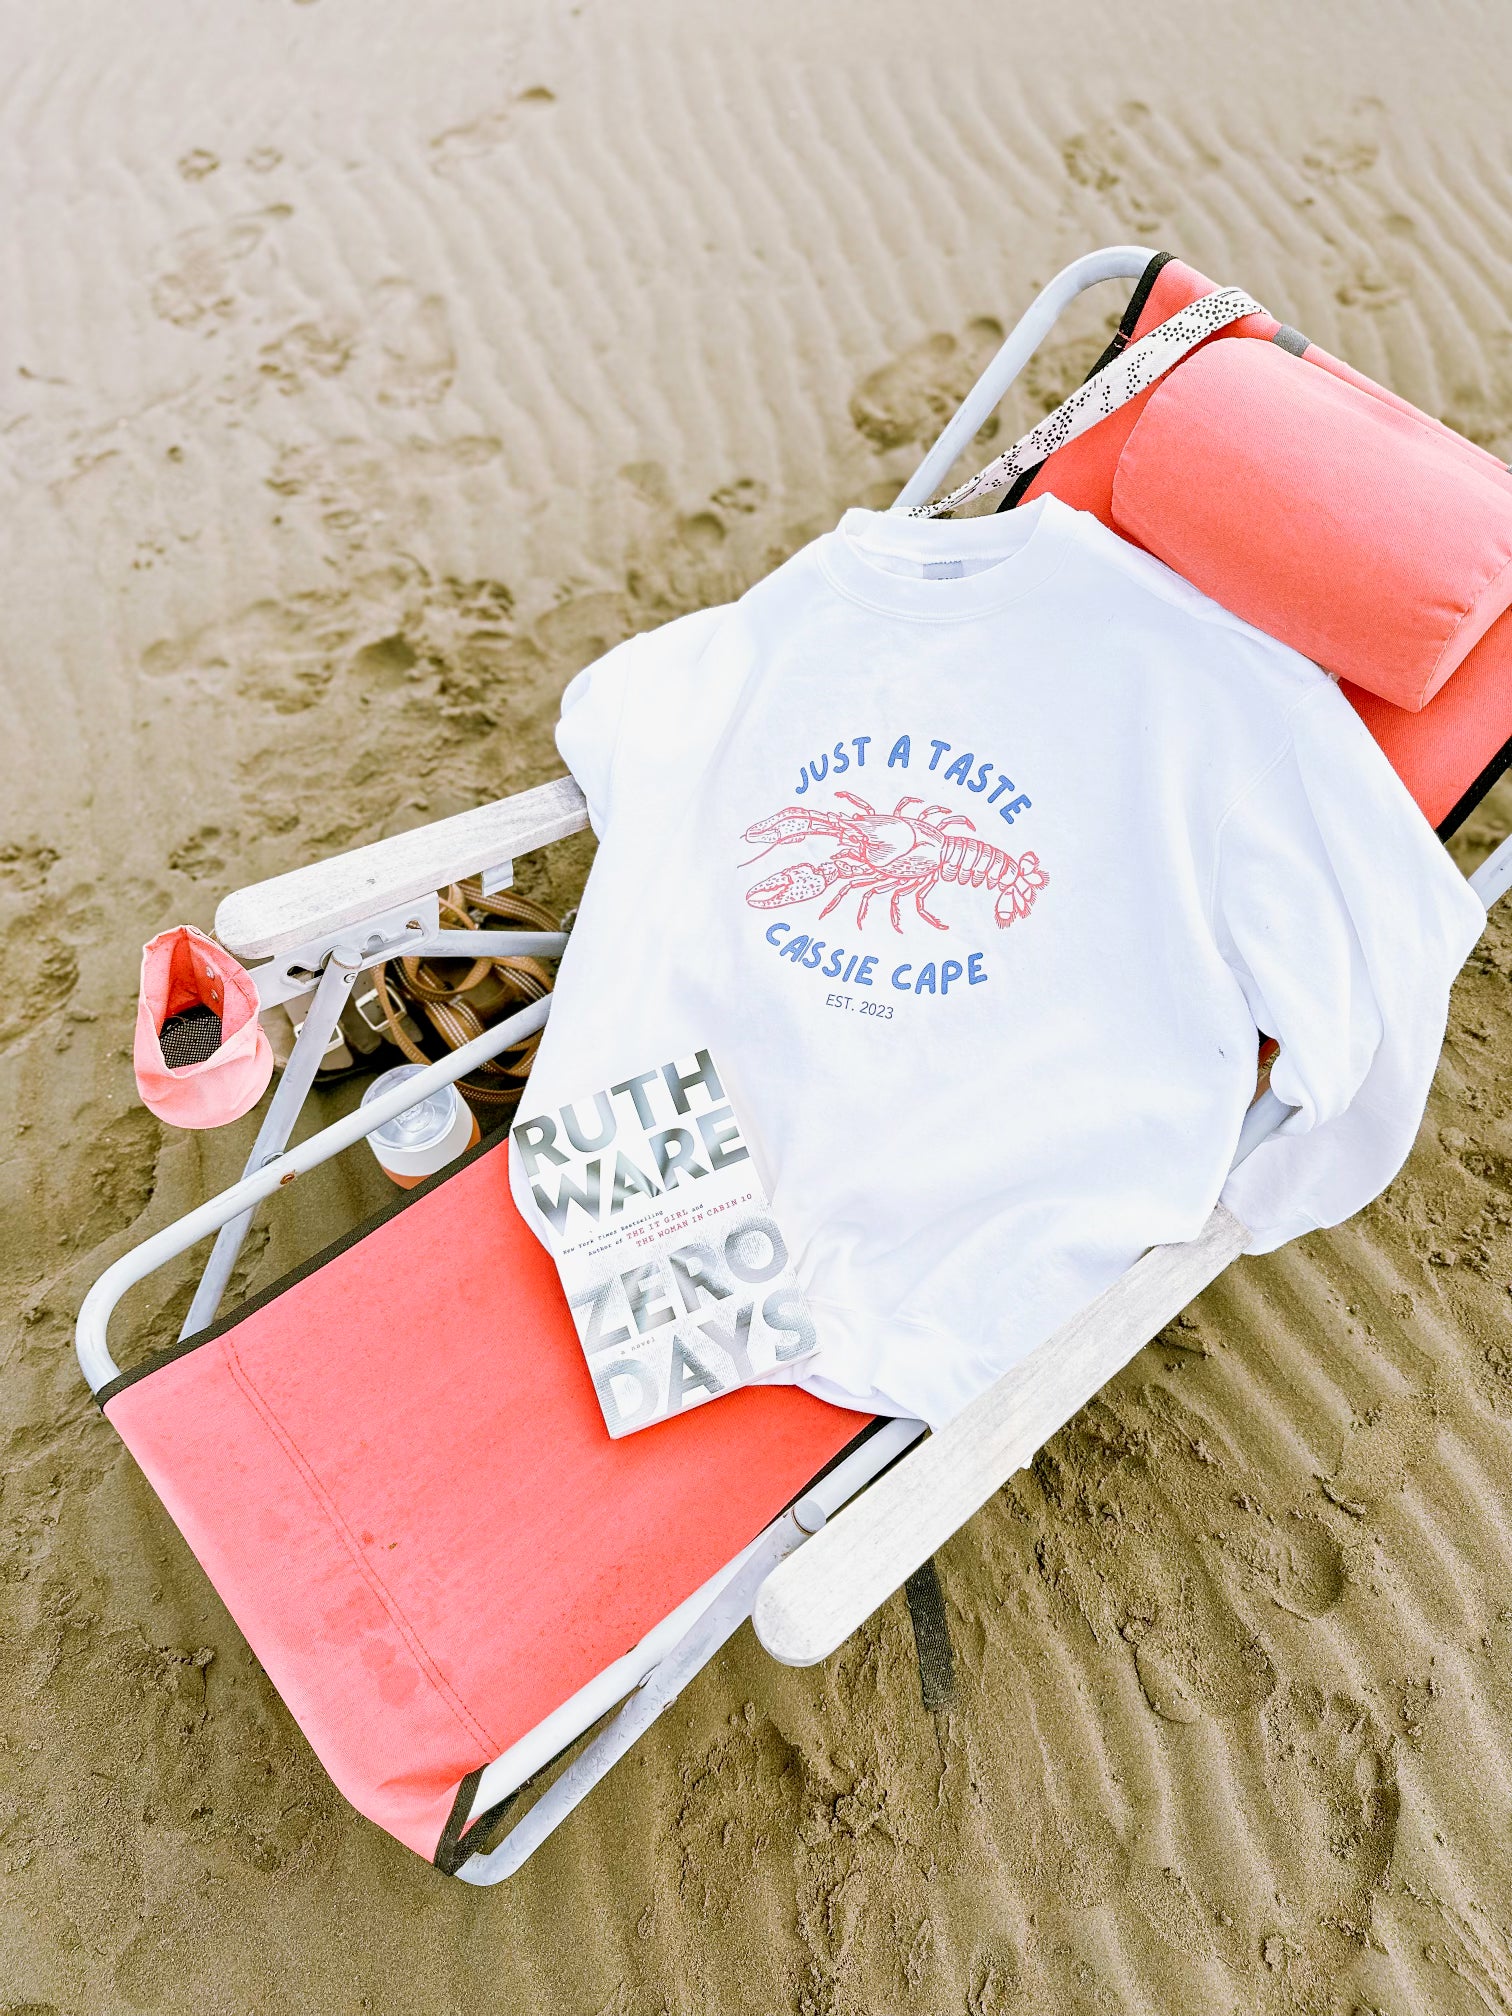 Caissie Cape sweater laid out on a beach chair with a good book, perfect for a relaxing day at the beach.